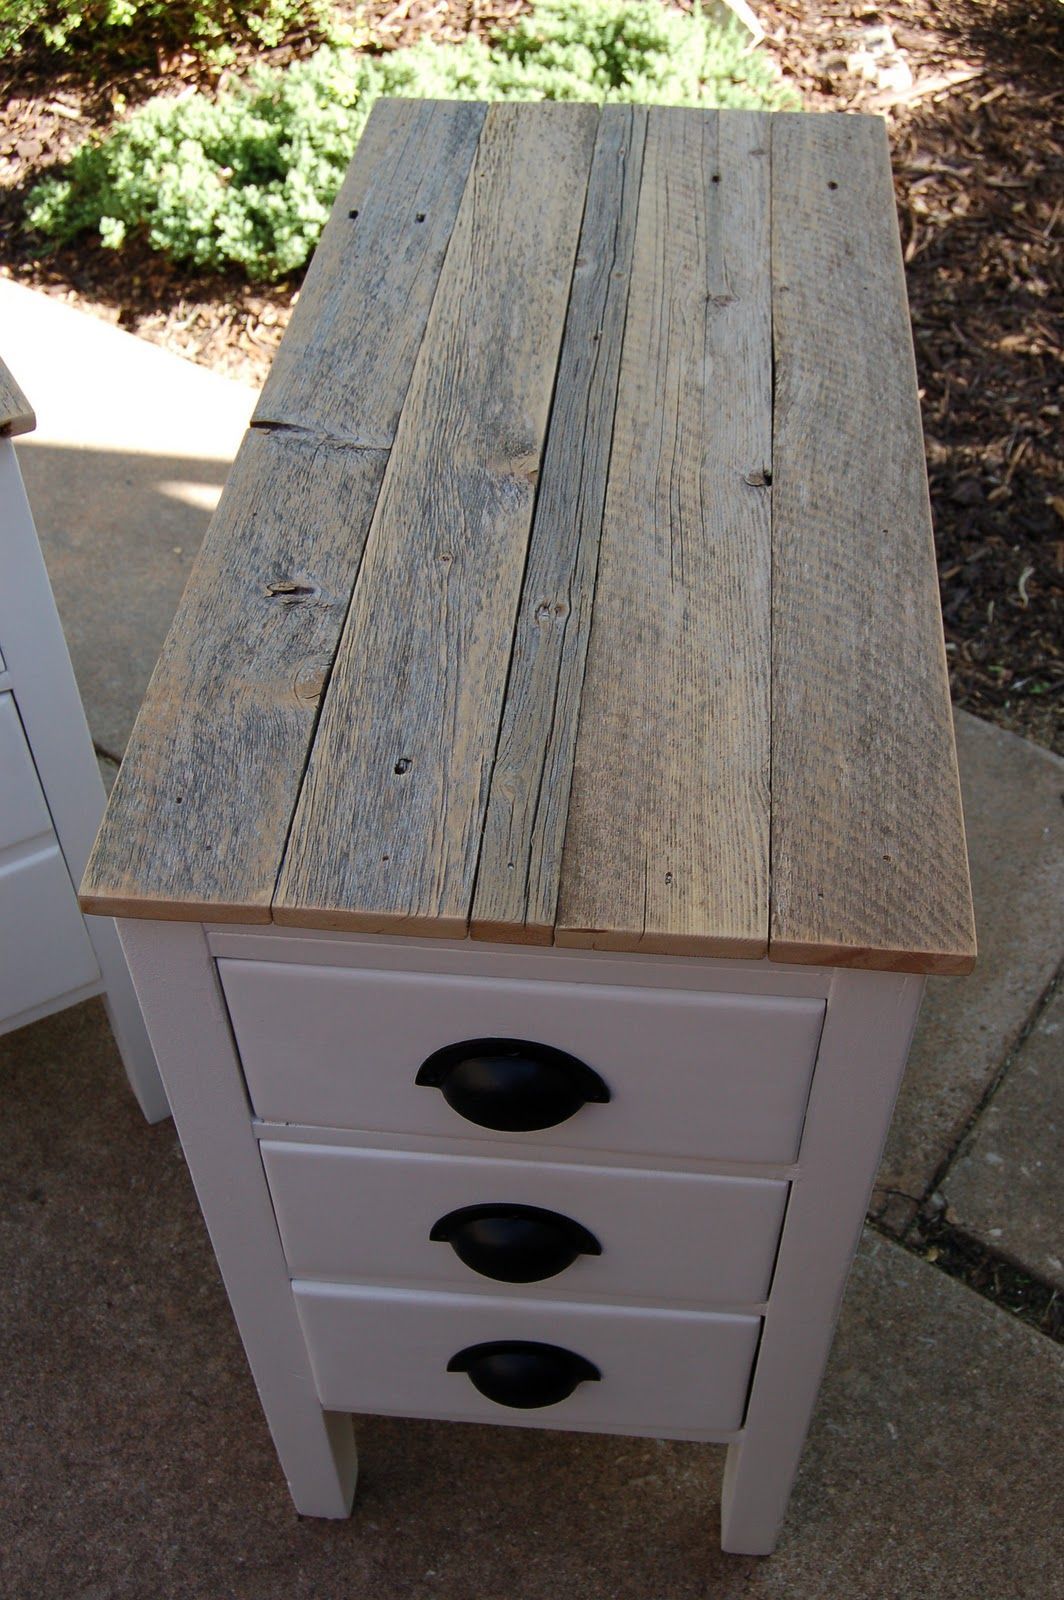 Gives me an idea for a couch-side table — two old bedside tables back to back w